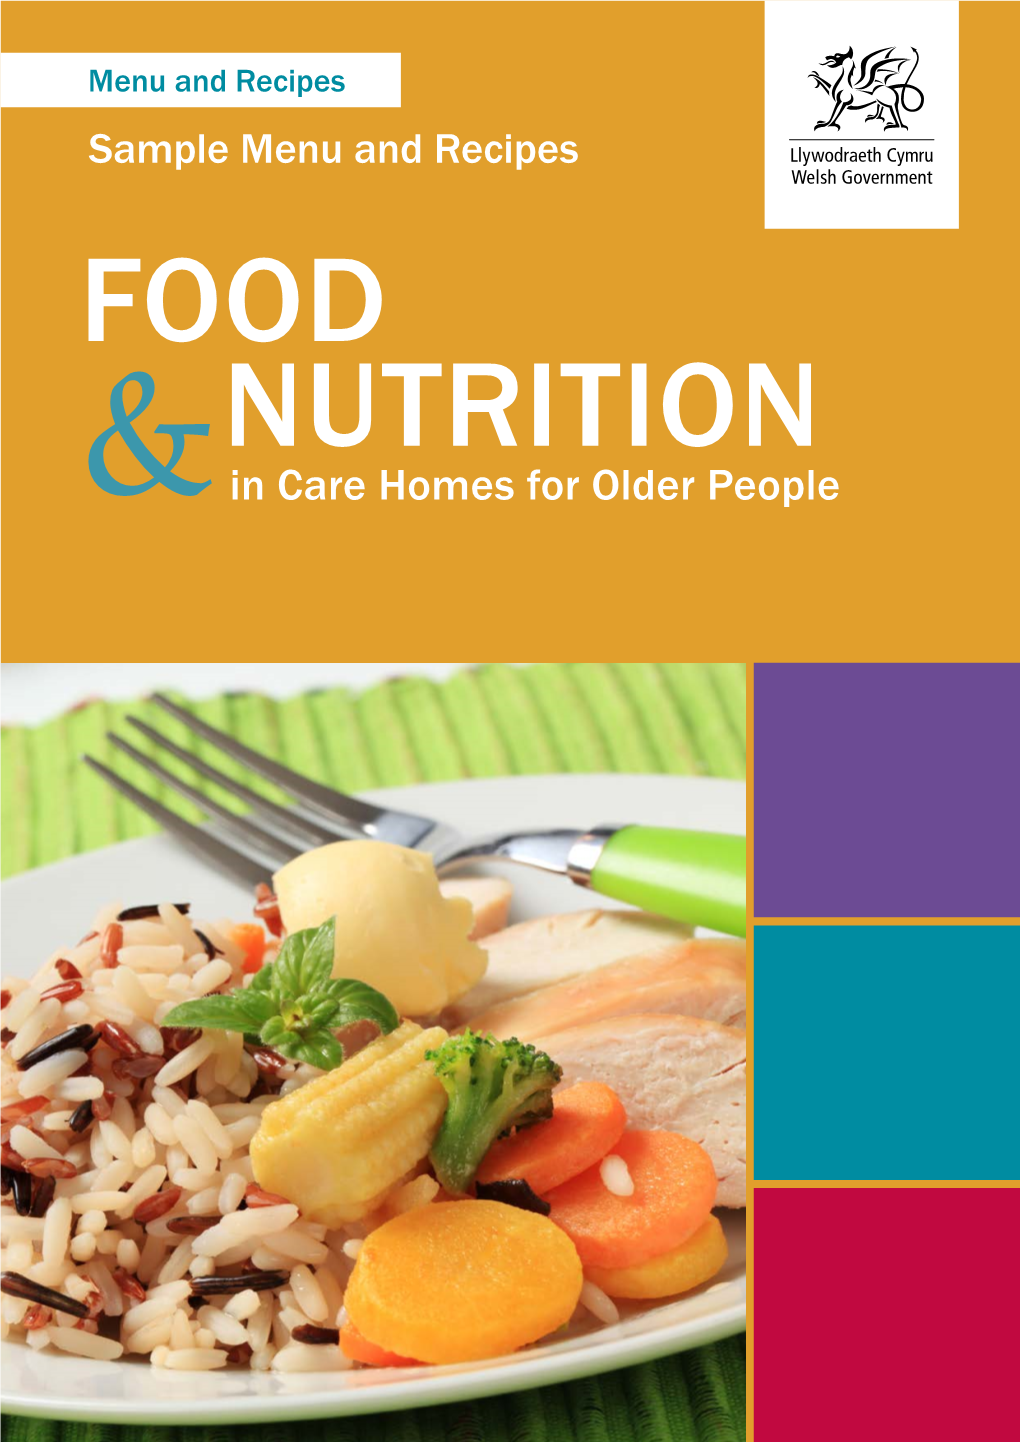 Sample Menu and Recipes FOOD NUTRITION & in Care Homes for Older People